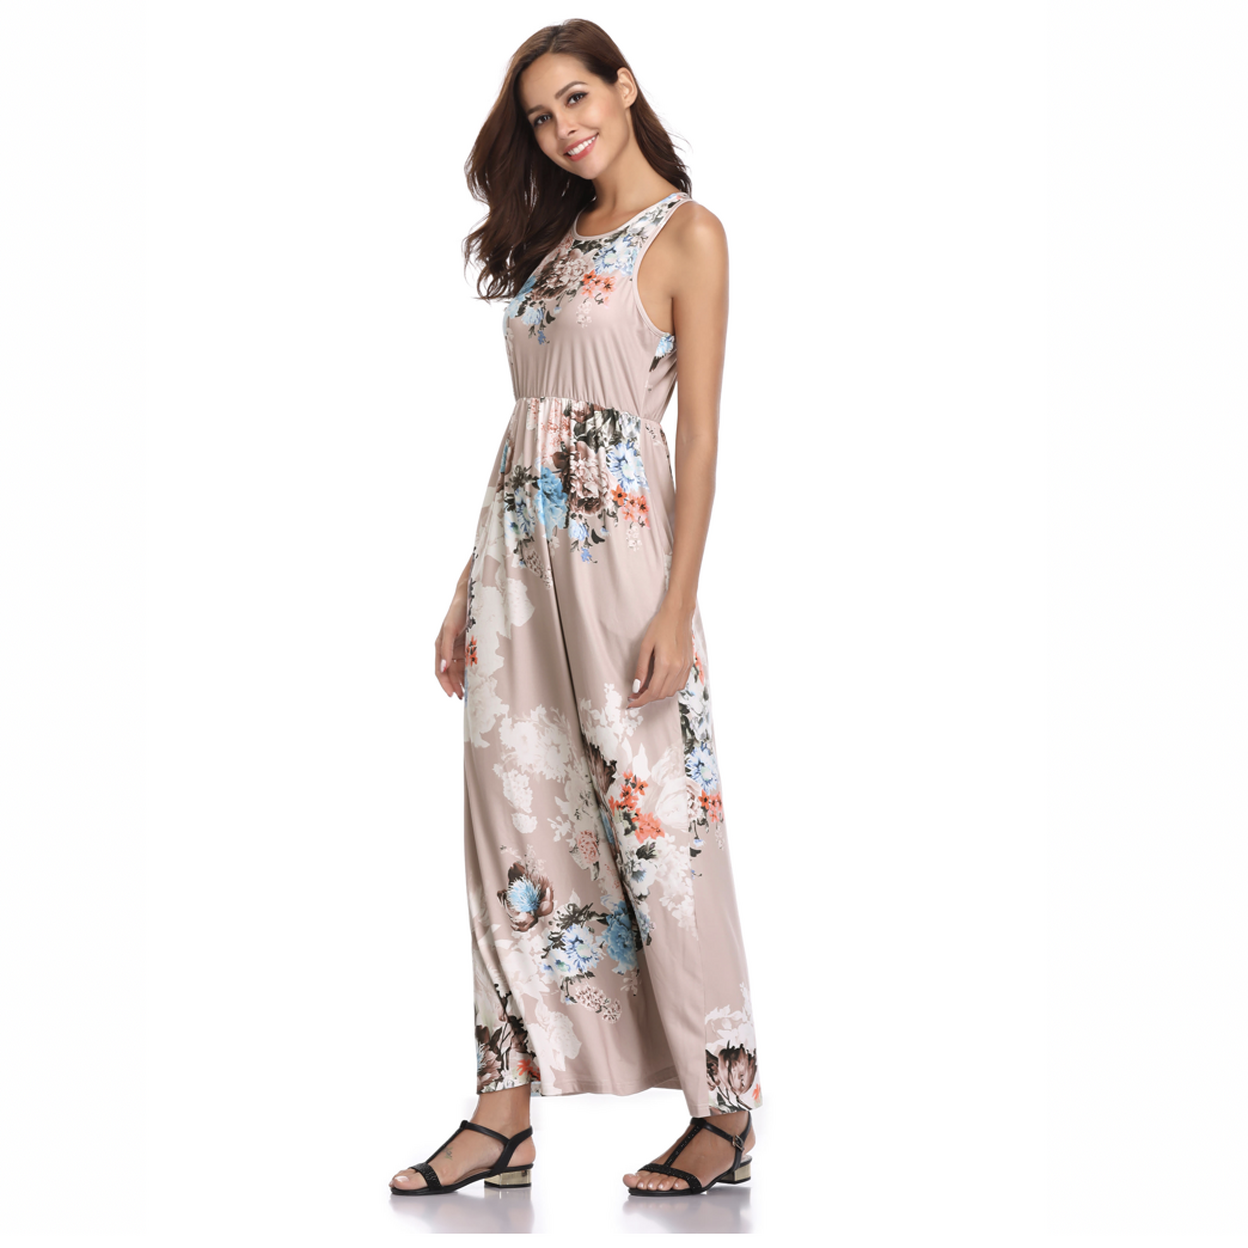 Lilly Posh Floral Maxi Dress In Multiple Colors | eBay